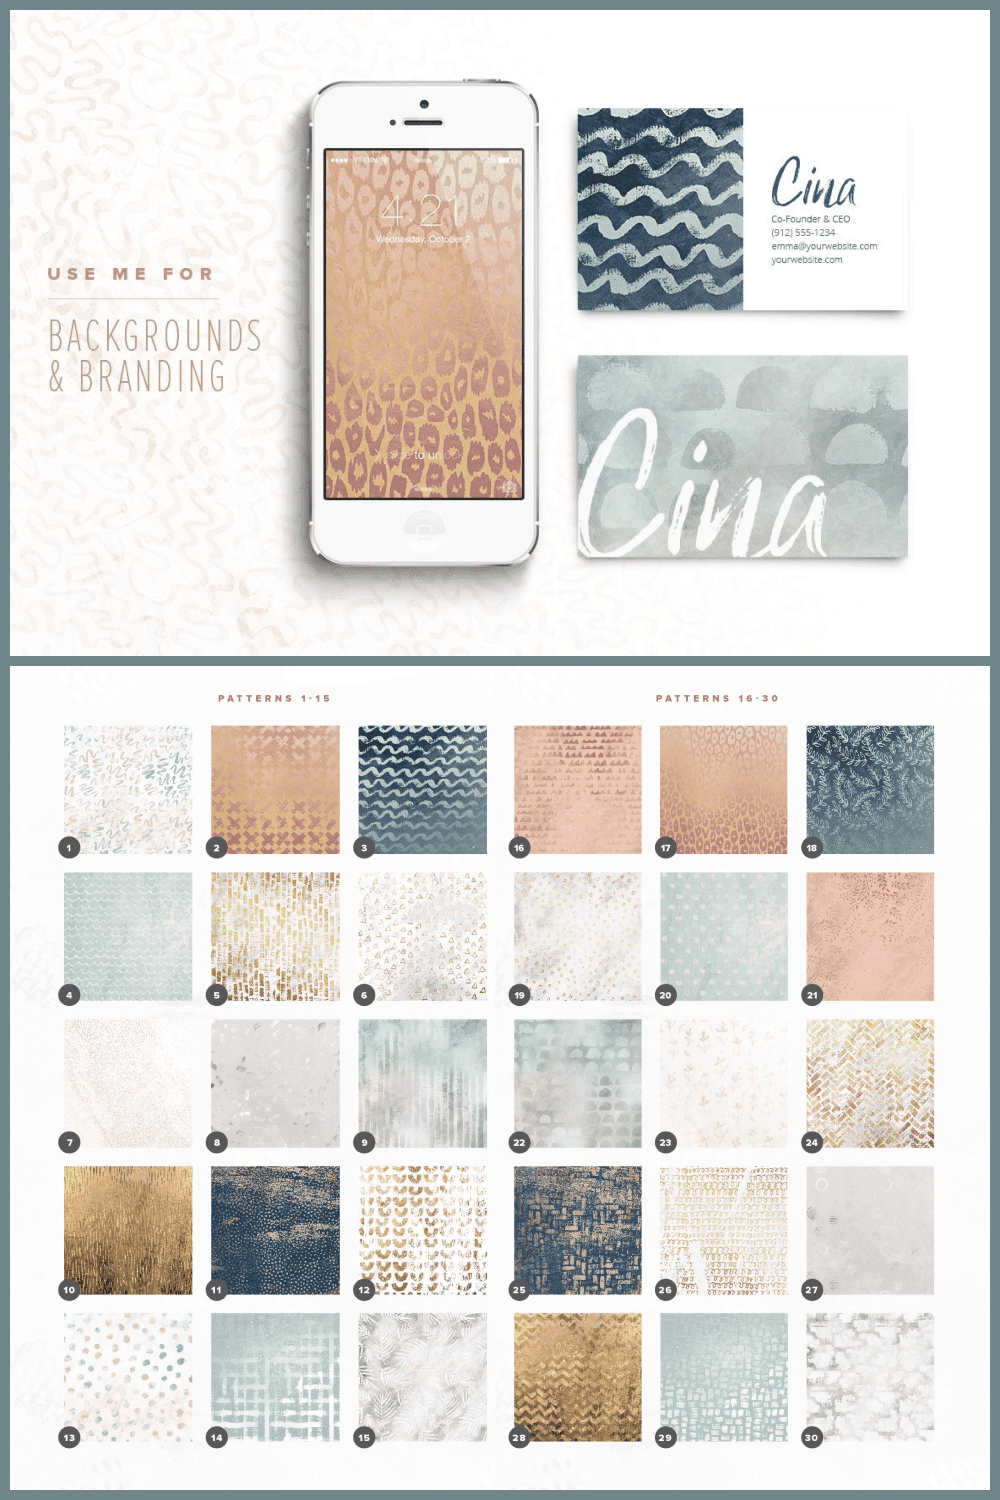 3 magical textured pattern collection